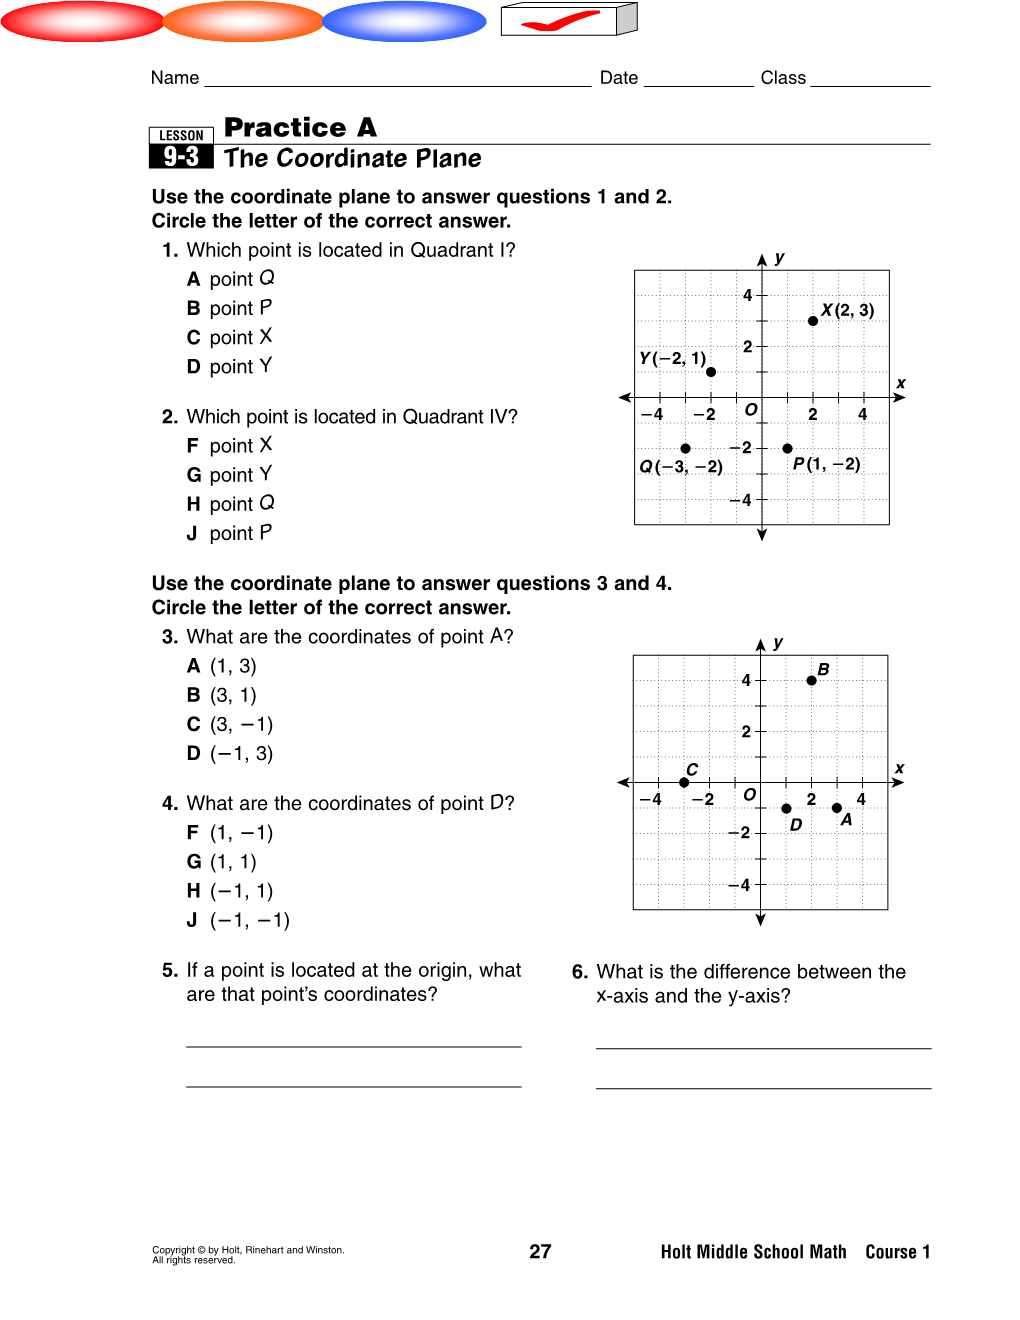 The Coordinate Plane Use the Coordinate Plane to Answer Questions 1 and 2